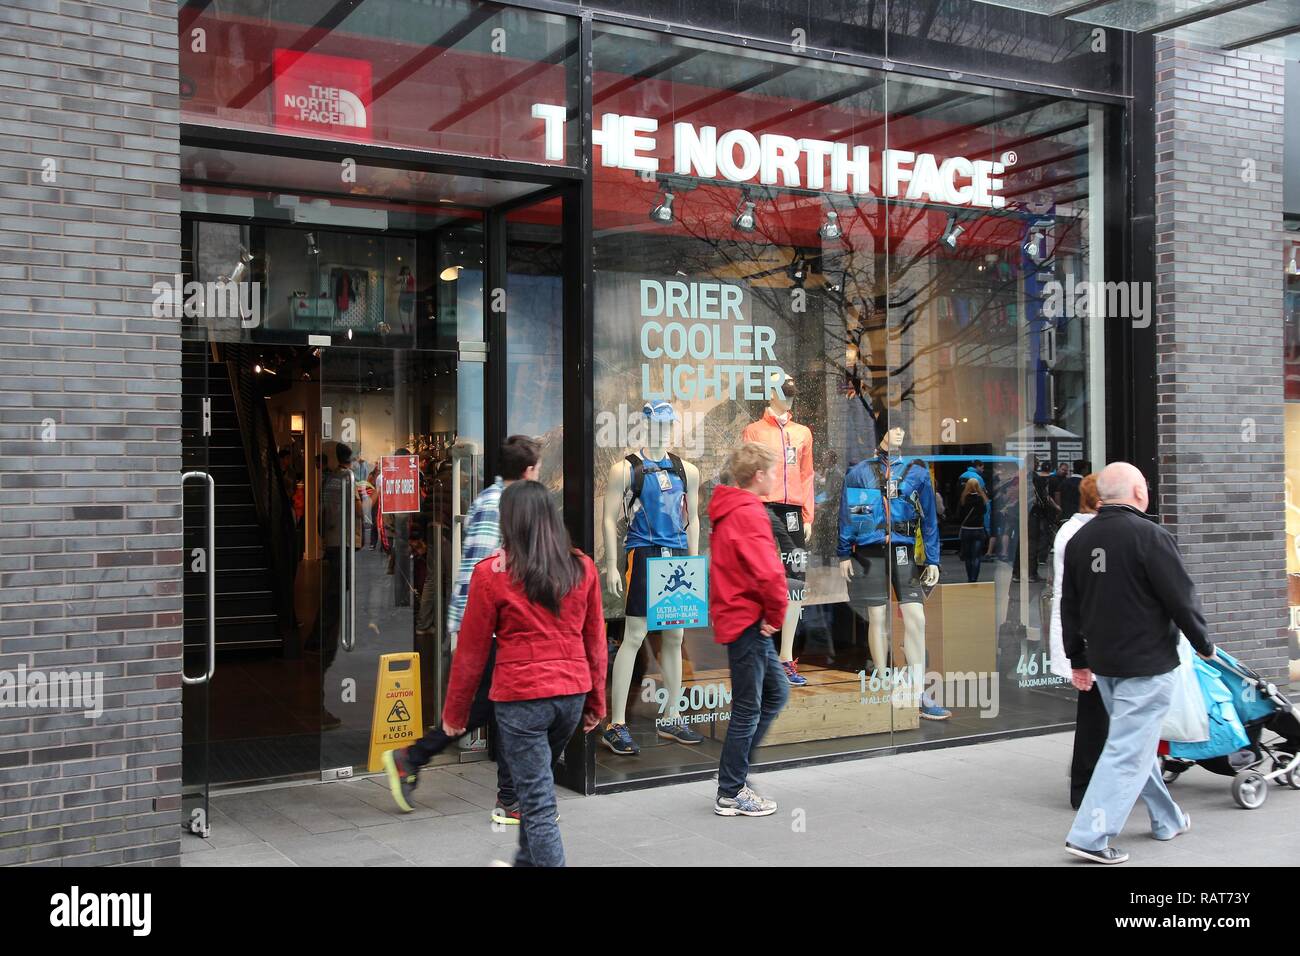 LIVERPOOL, UK - APRIL 20, 2013: The North Face store in Liverpool, UK. North  Face is an American outdoor products company founded in 1968 present in U  Stock Photo - Alamy